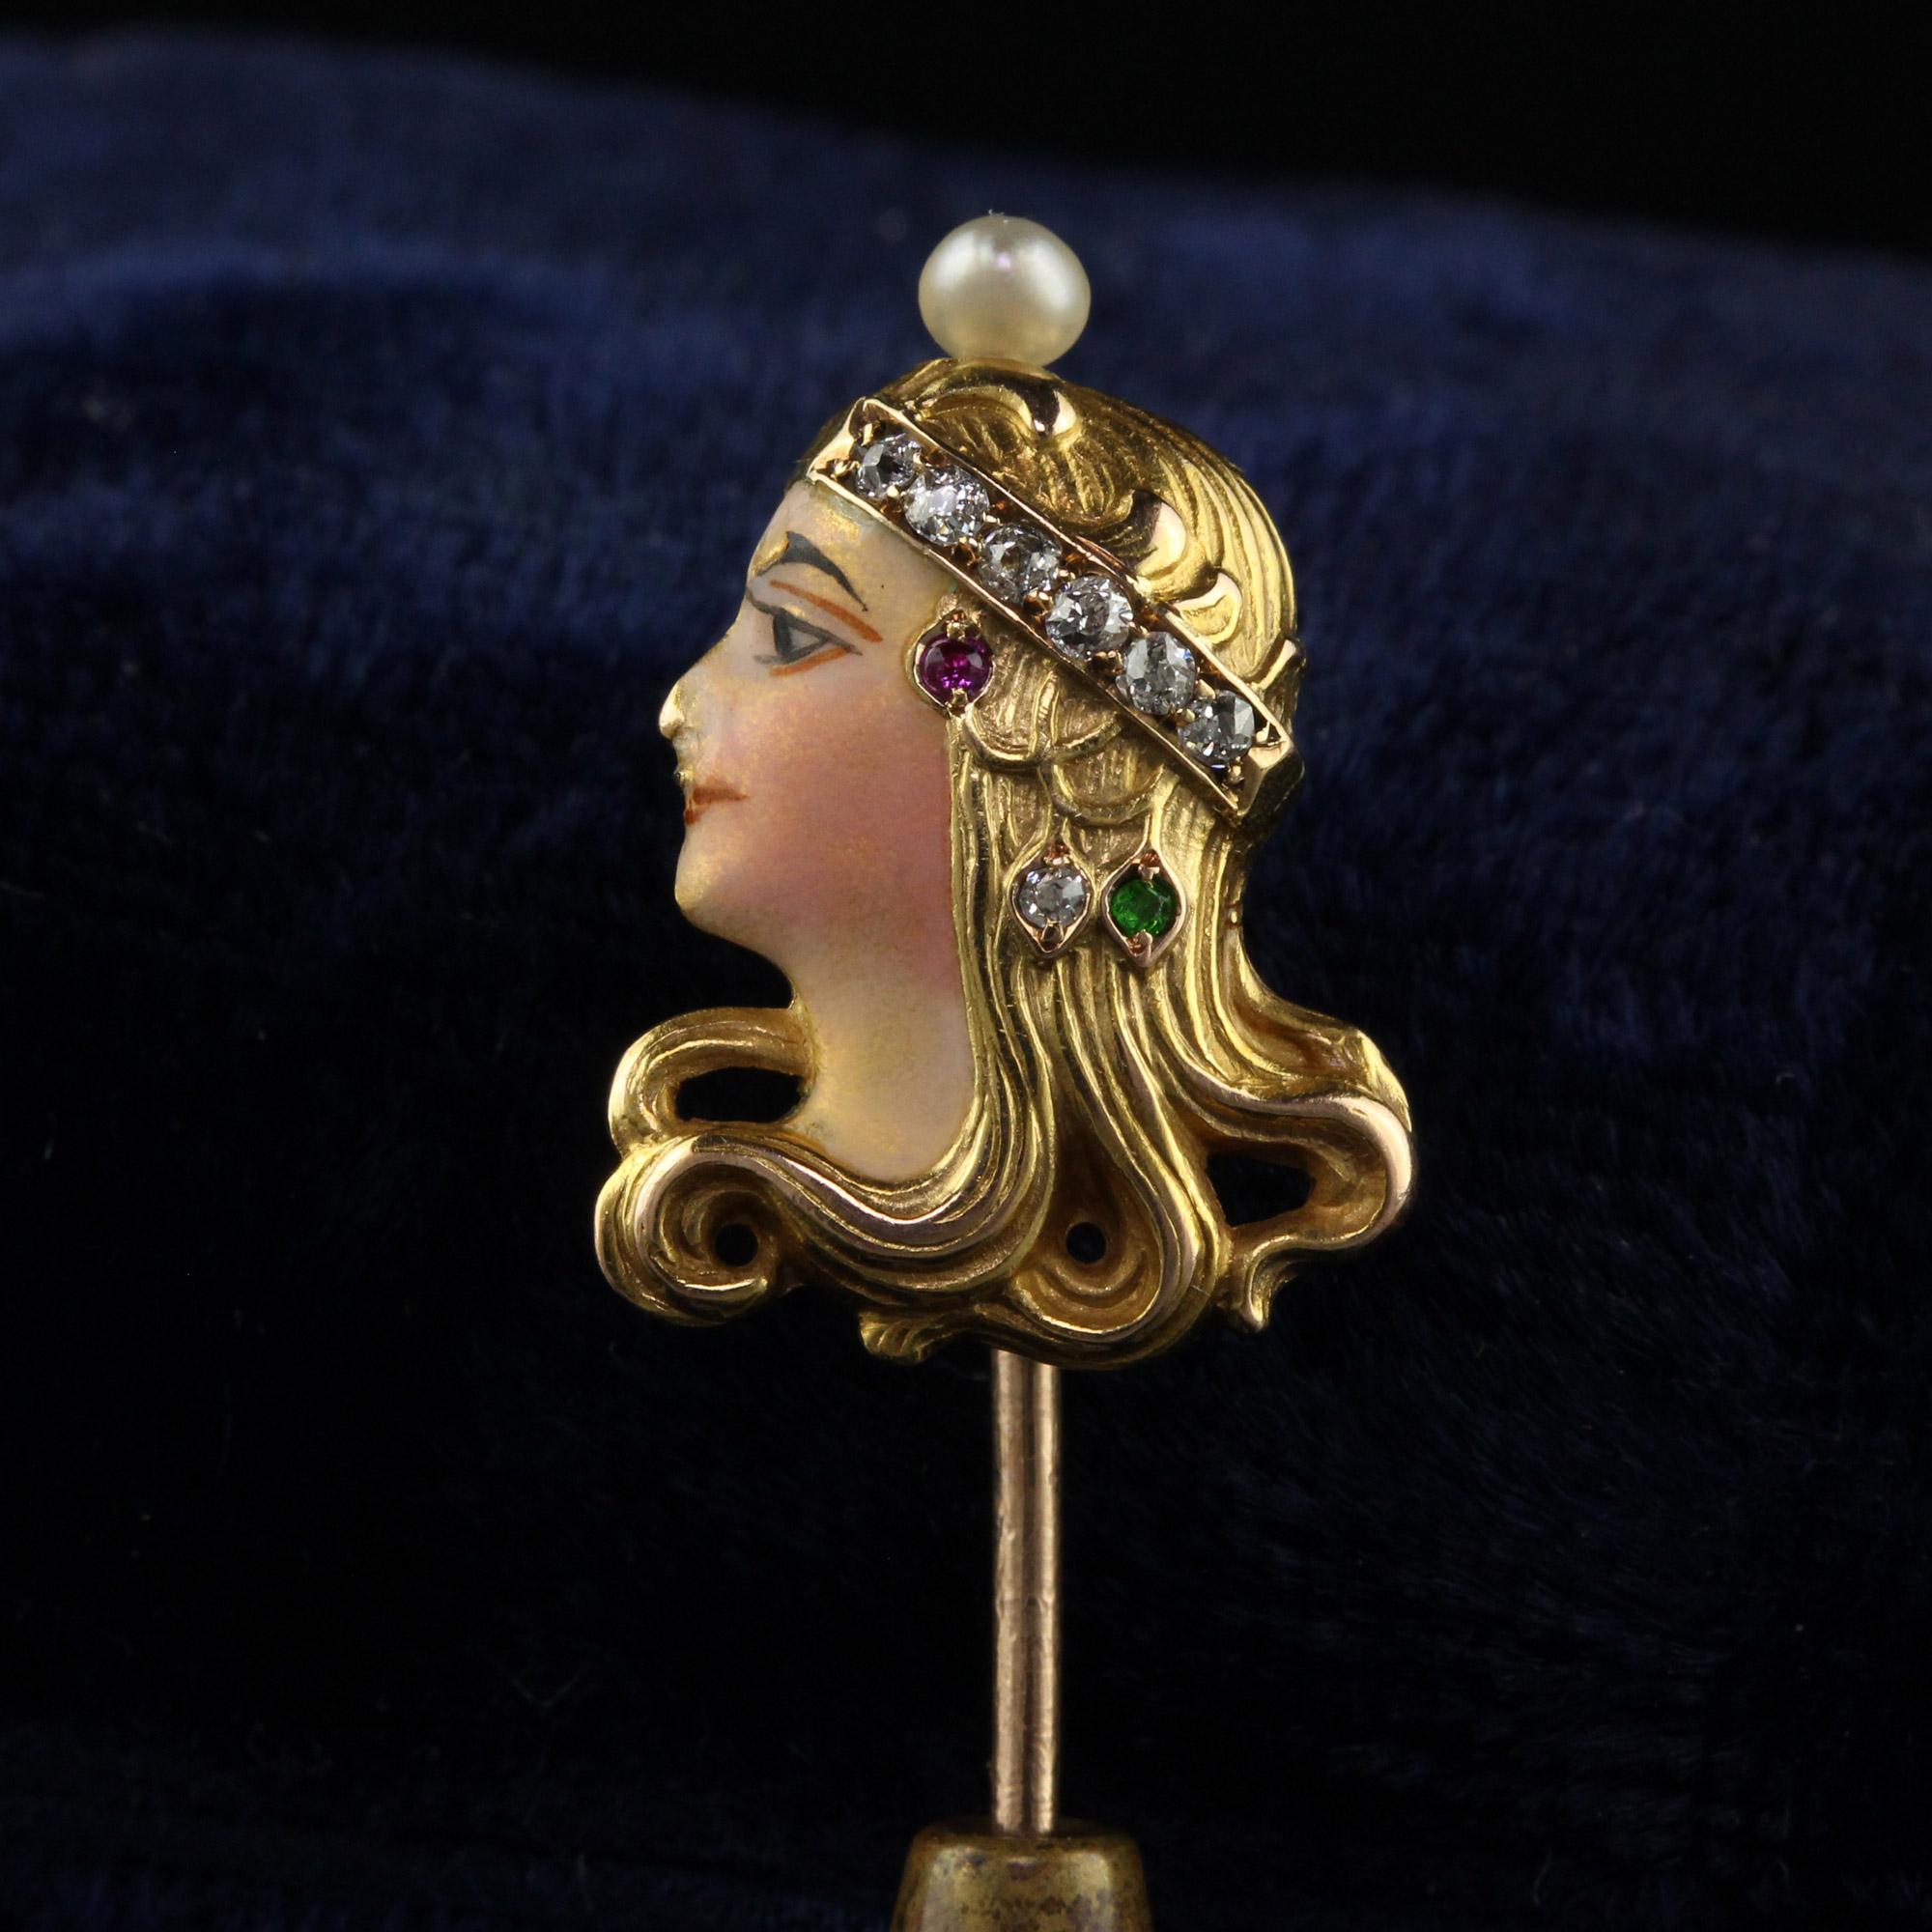 Beautiful Antique Art Nouveau 14K Yellow Gold Enamel Diamond Lady Stick Pin. This gorgeous Art Nouveau stick pin is crafted in 14k yellow gold. The pin features a lady that has an enamel face with makeup on it. Her headband is made of a row of old